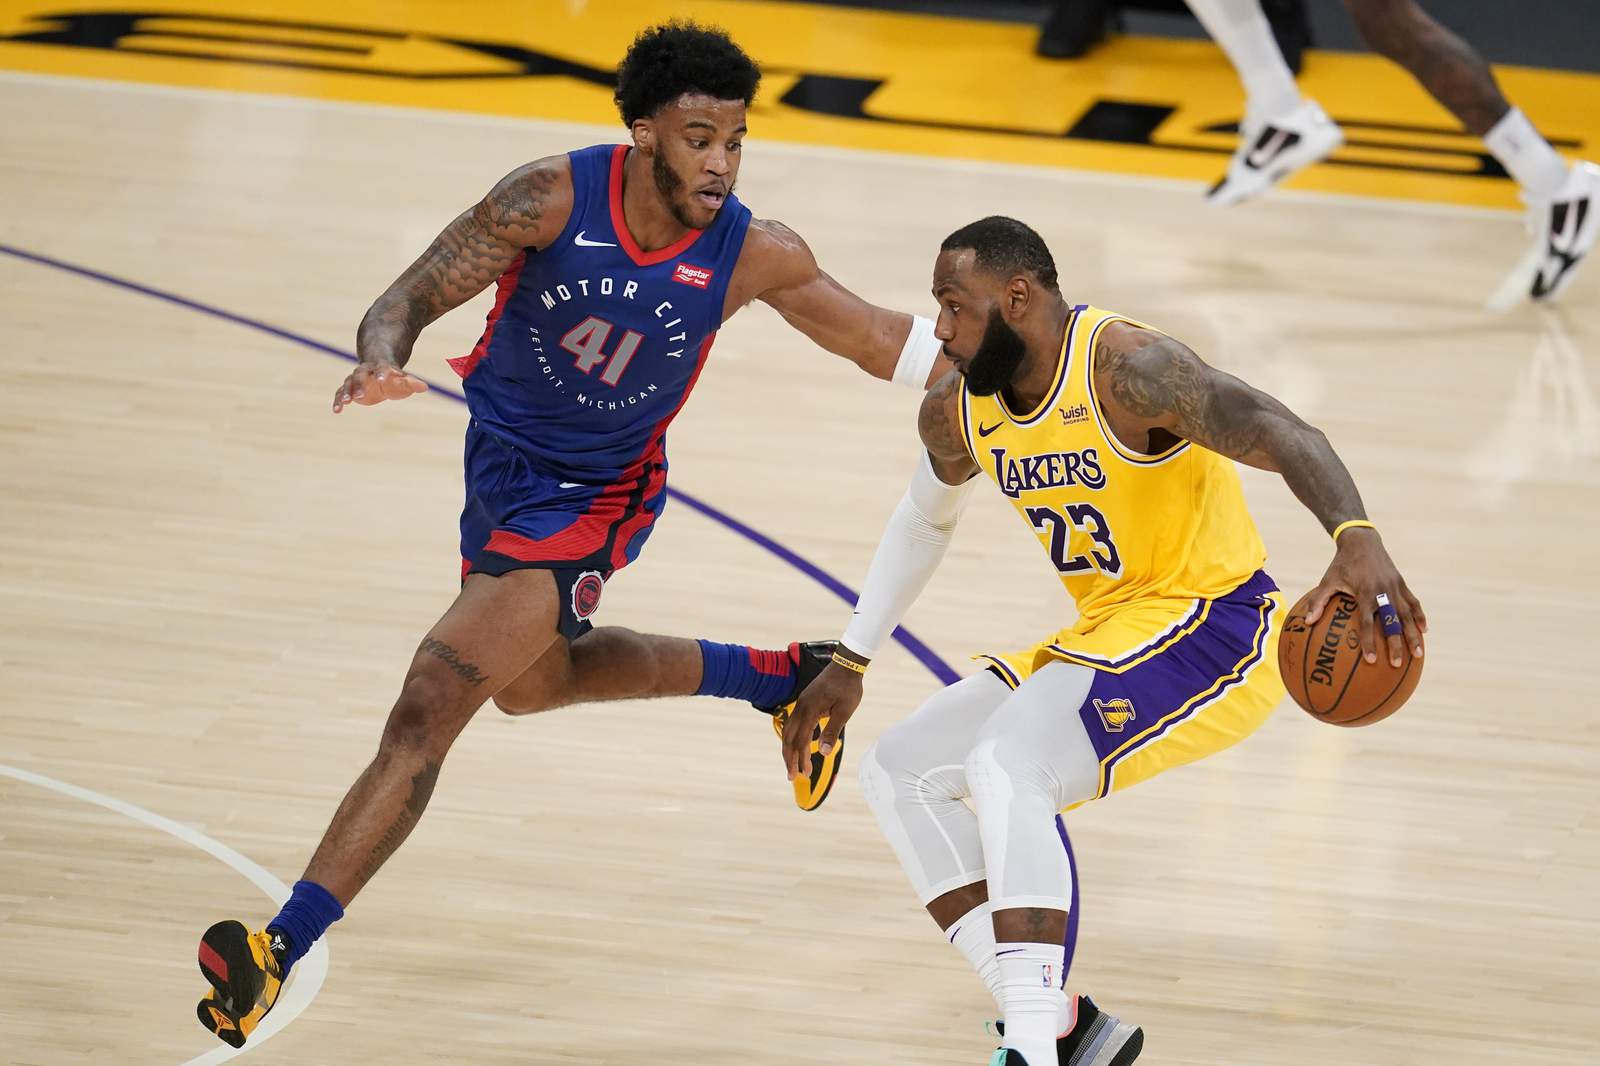 LeBron takes charge in 2nd OT, Lakers edge Pistons 135-129